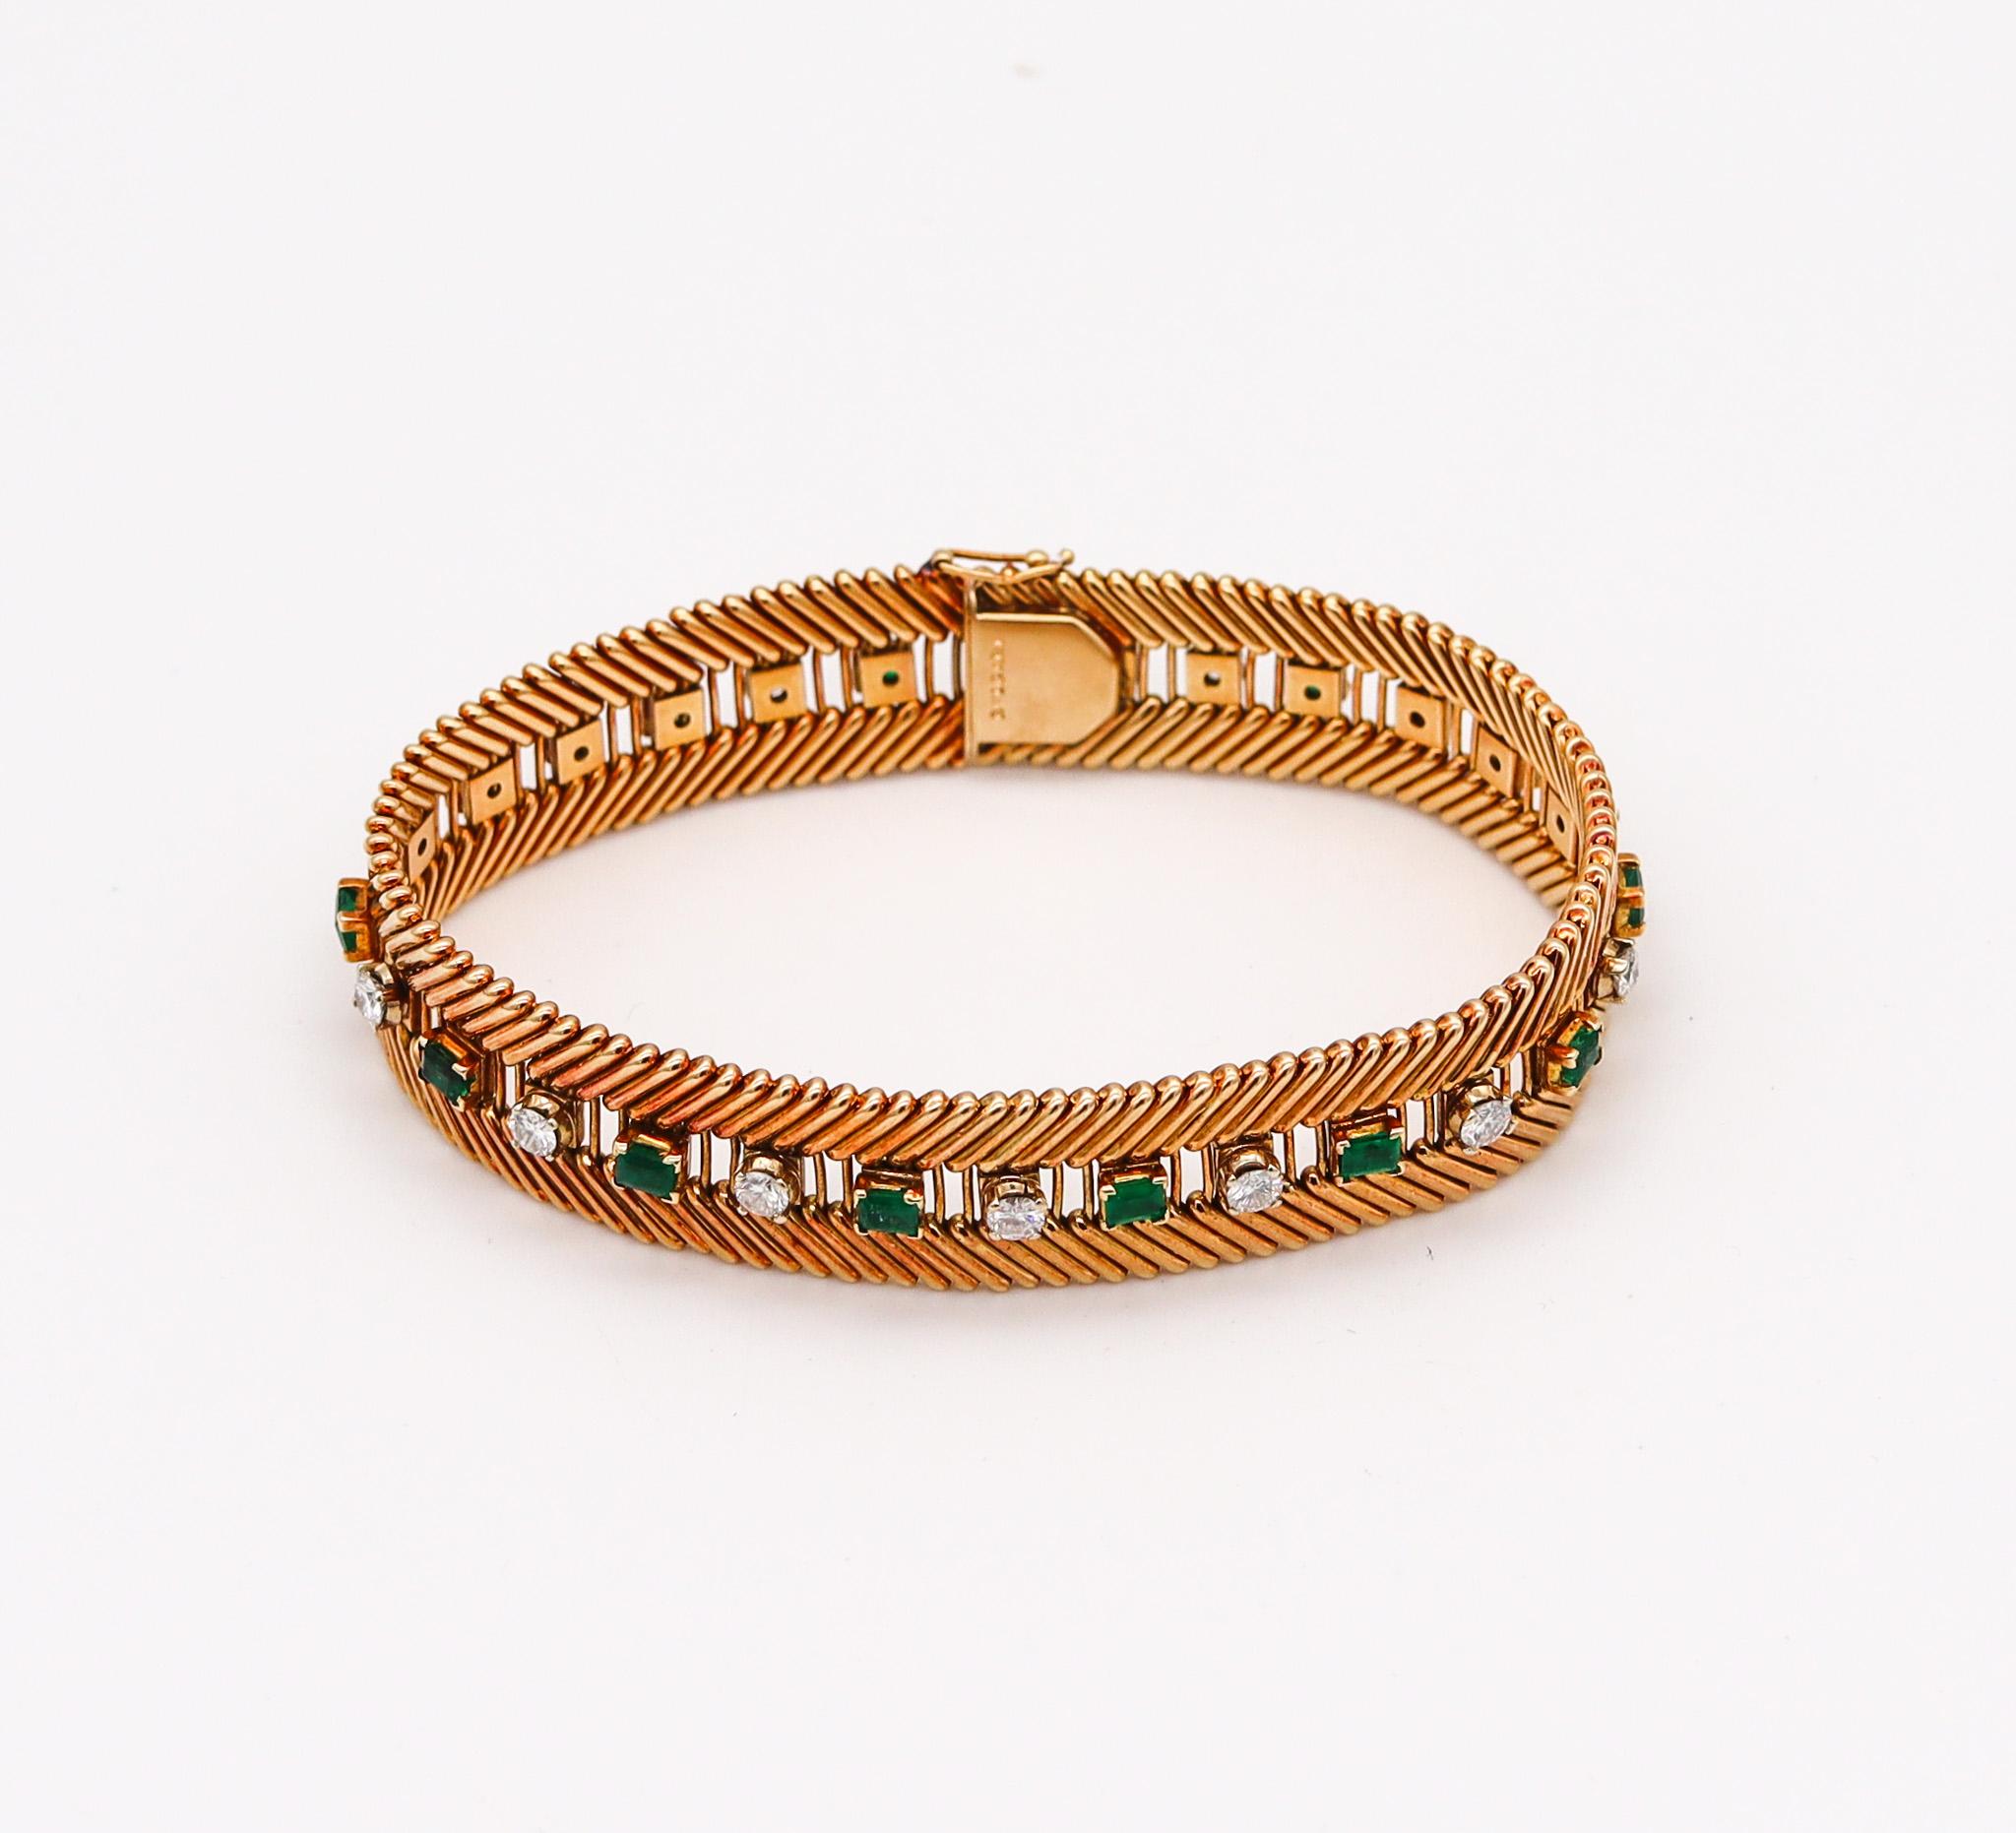 Modernist Bvlgari Milano 1950 Bracelet in 18k Gold with 5.88ctw in Emerald and Diamonds For Sale